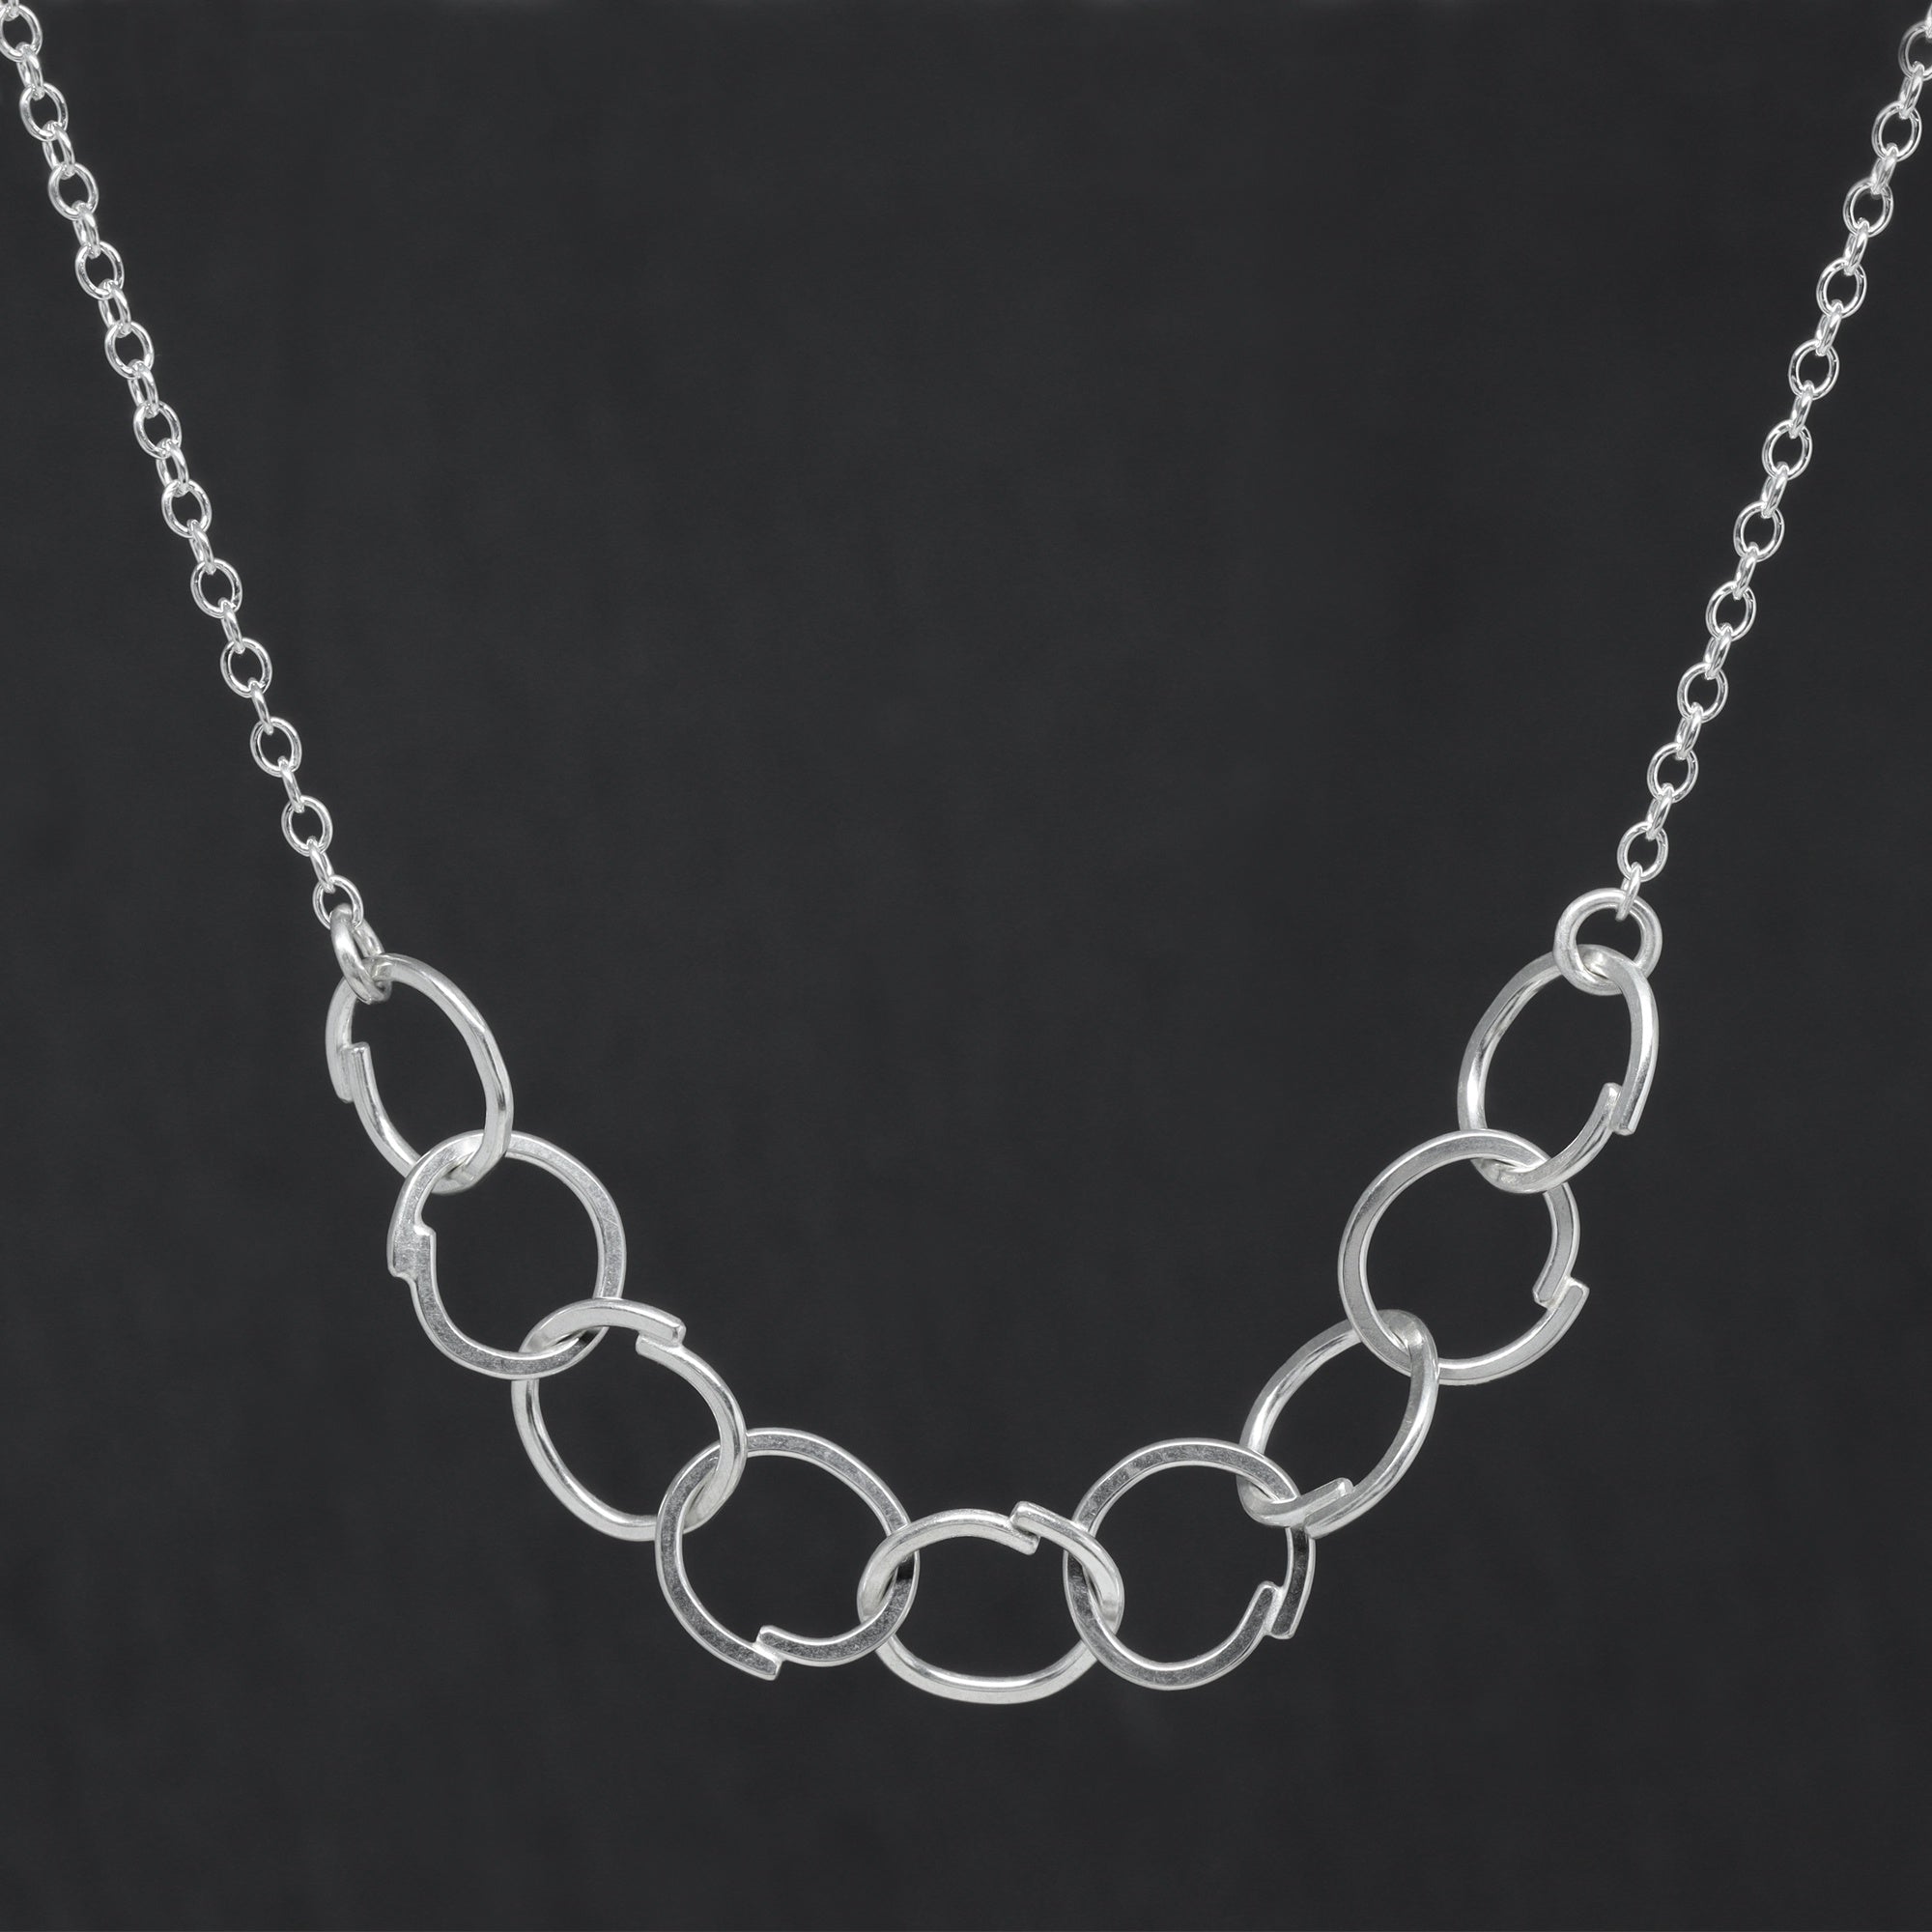 Sketch Mini Links Necklace - Bright Sterling